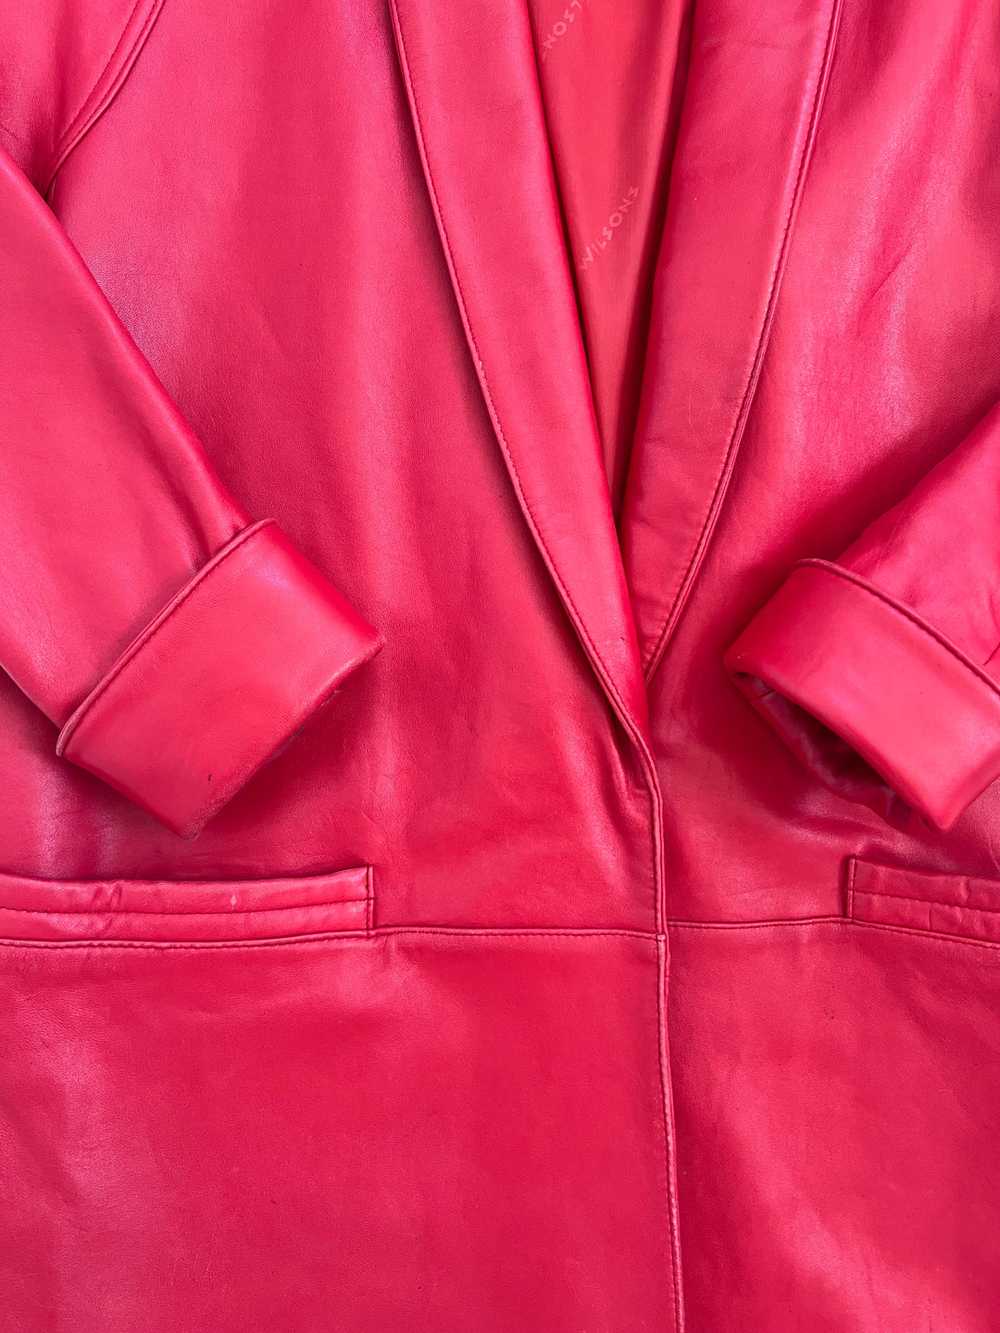 Red Leather Jacket - image 9